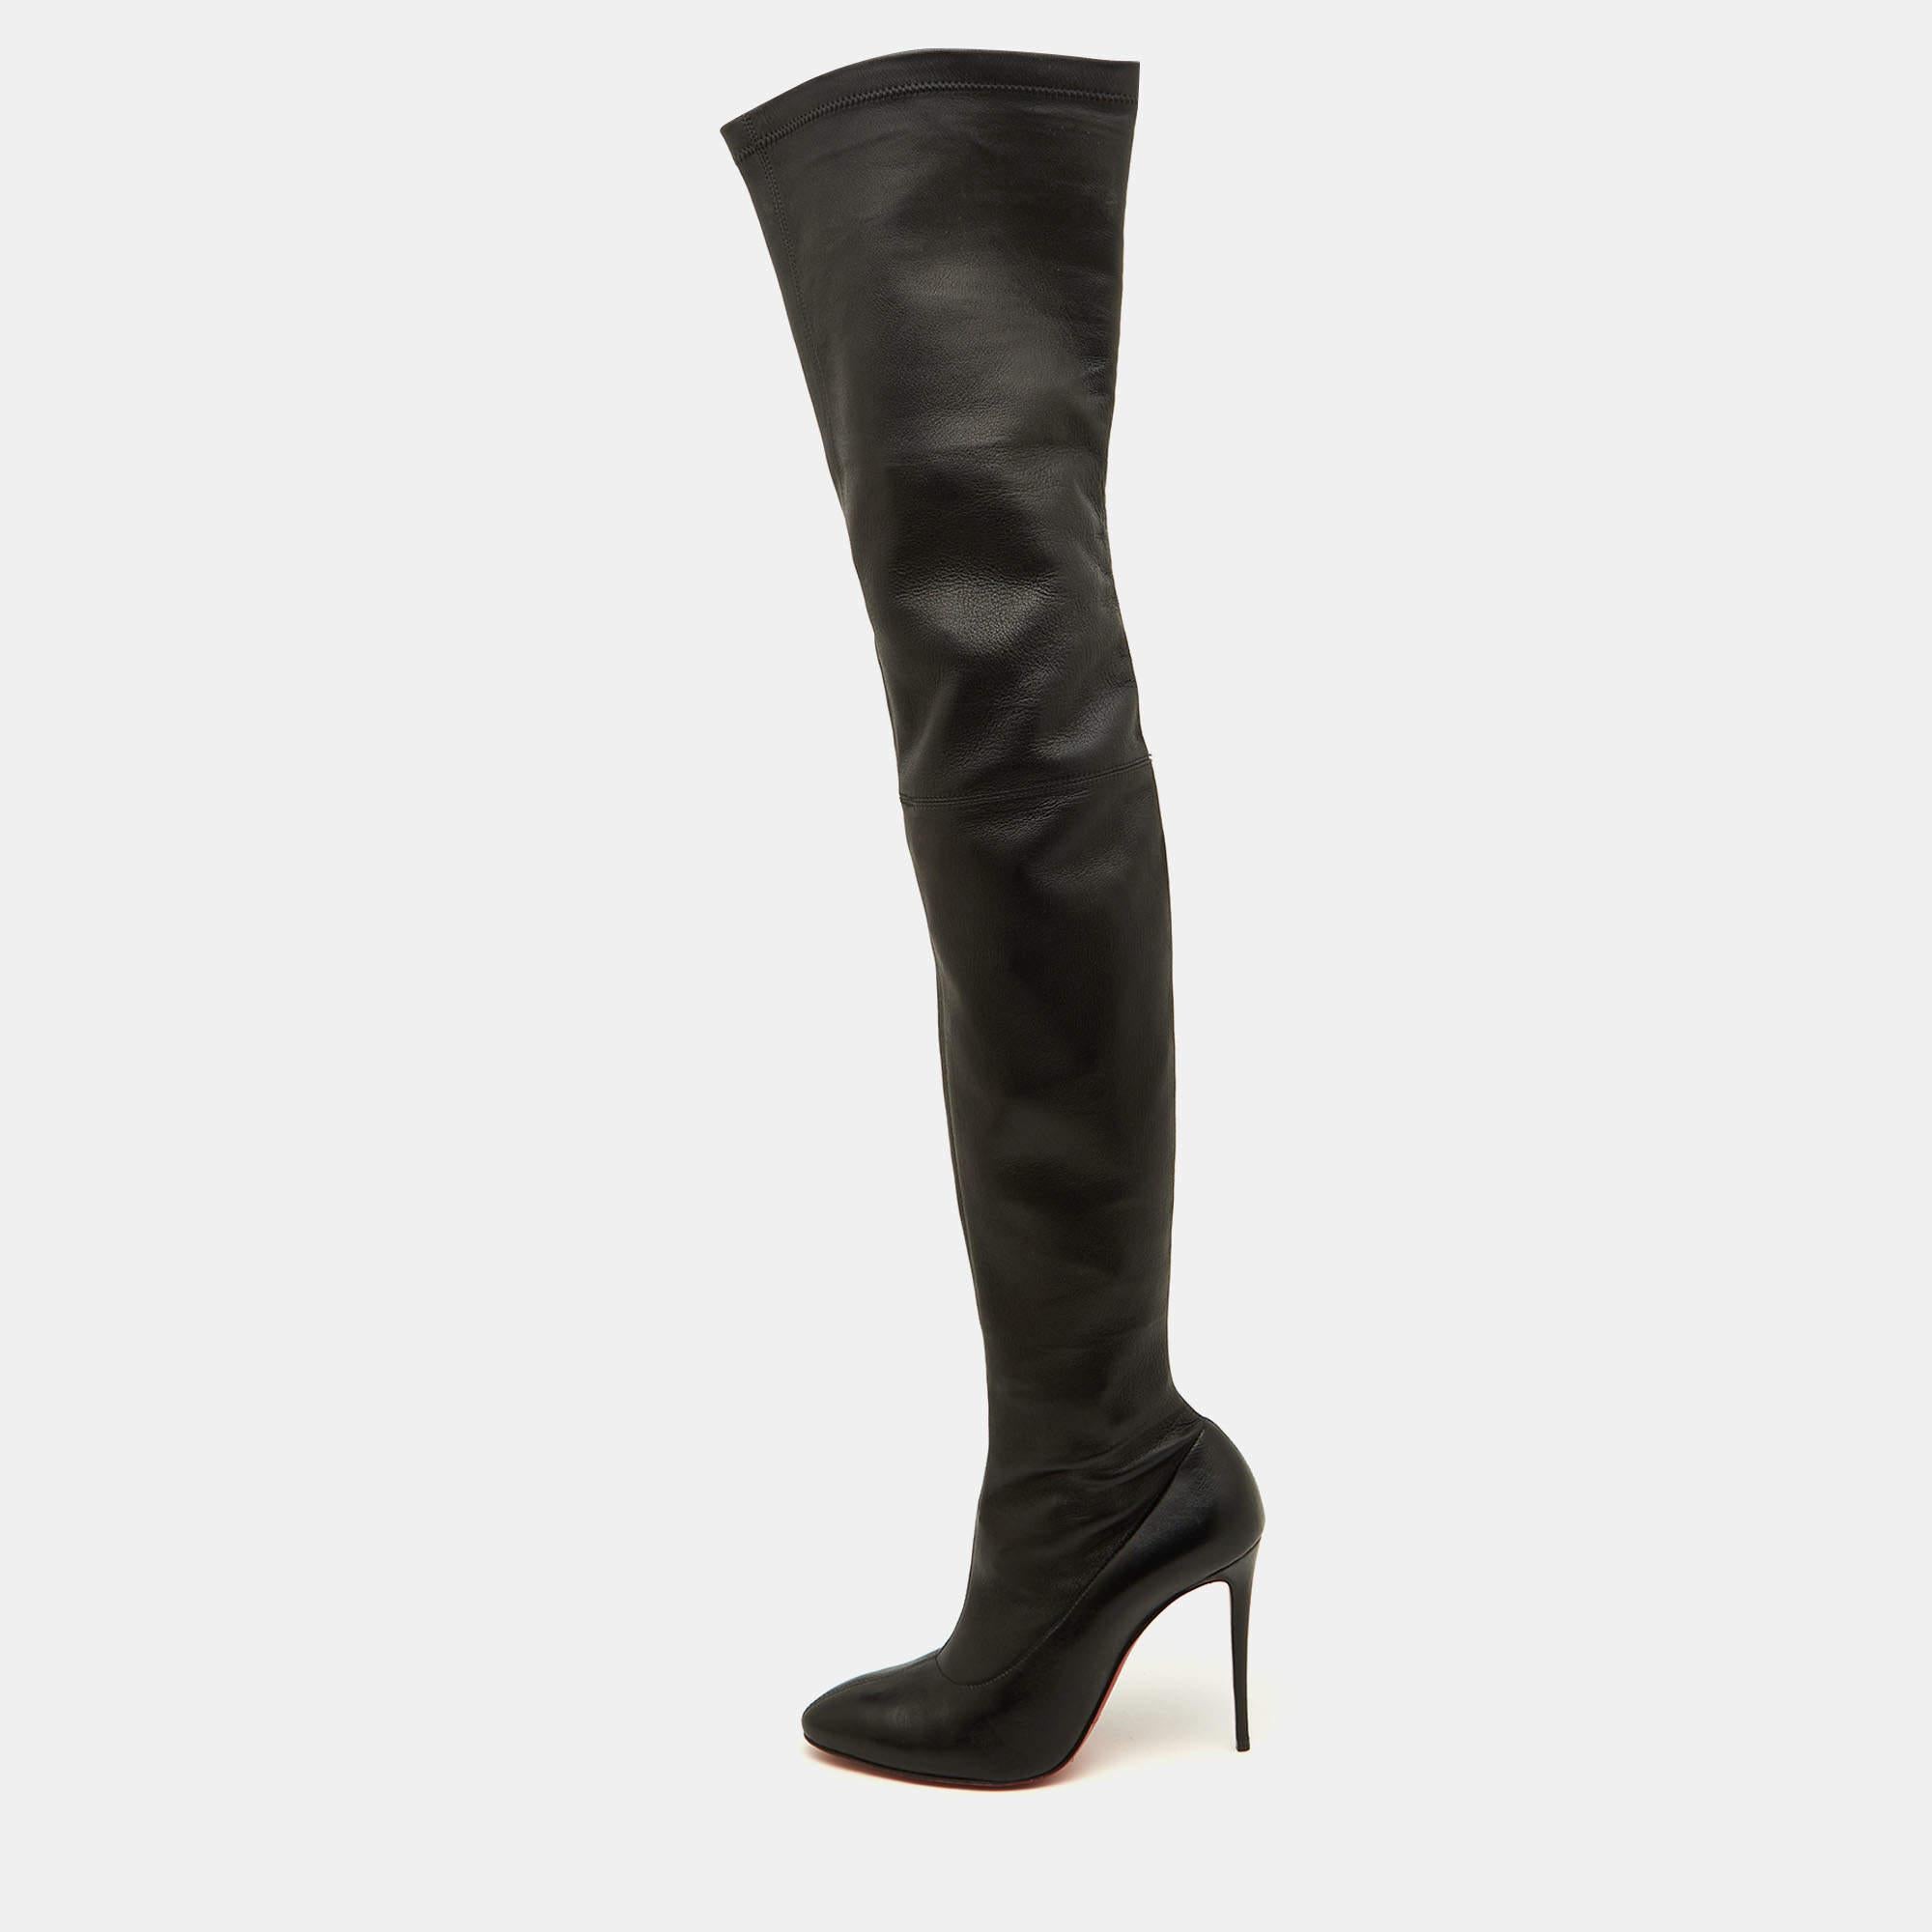 Stun the crowd when you wear these monice thigh high boots by Christian Louboutin. These edgy and classy boots are made from suede and feature 10.5cm heels. Team them up with a mini skirt and a leather jacket or with a short dress.

Includes: